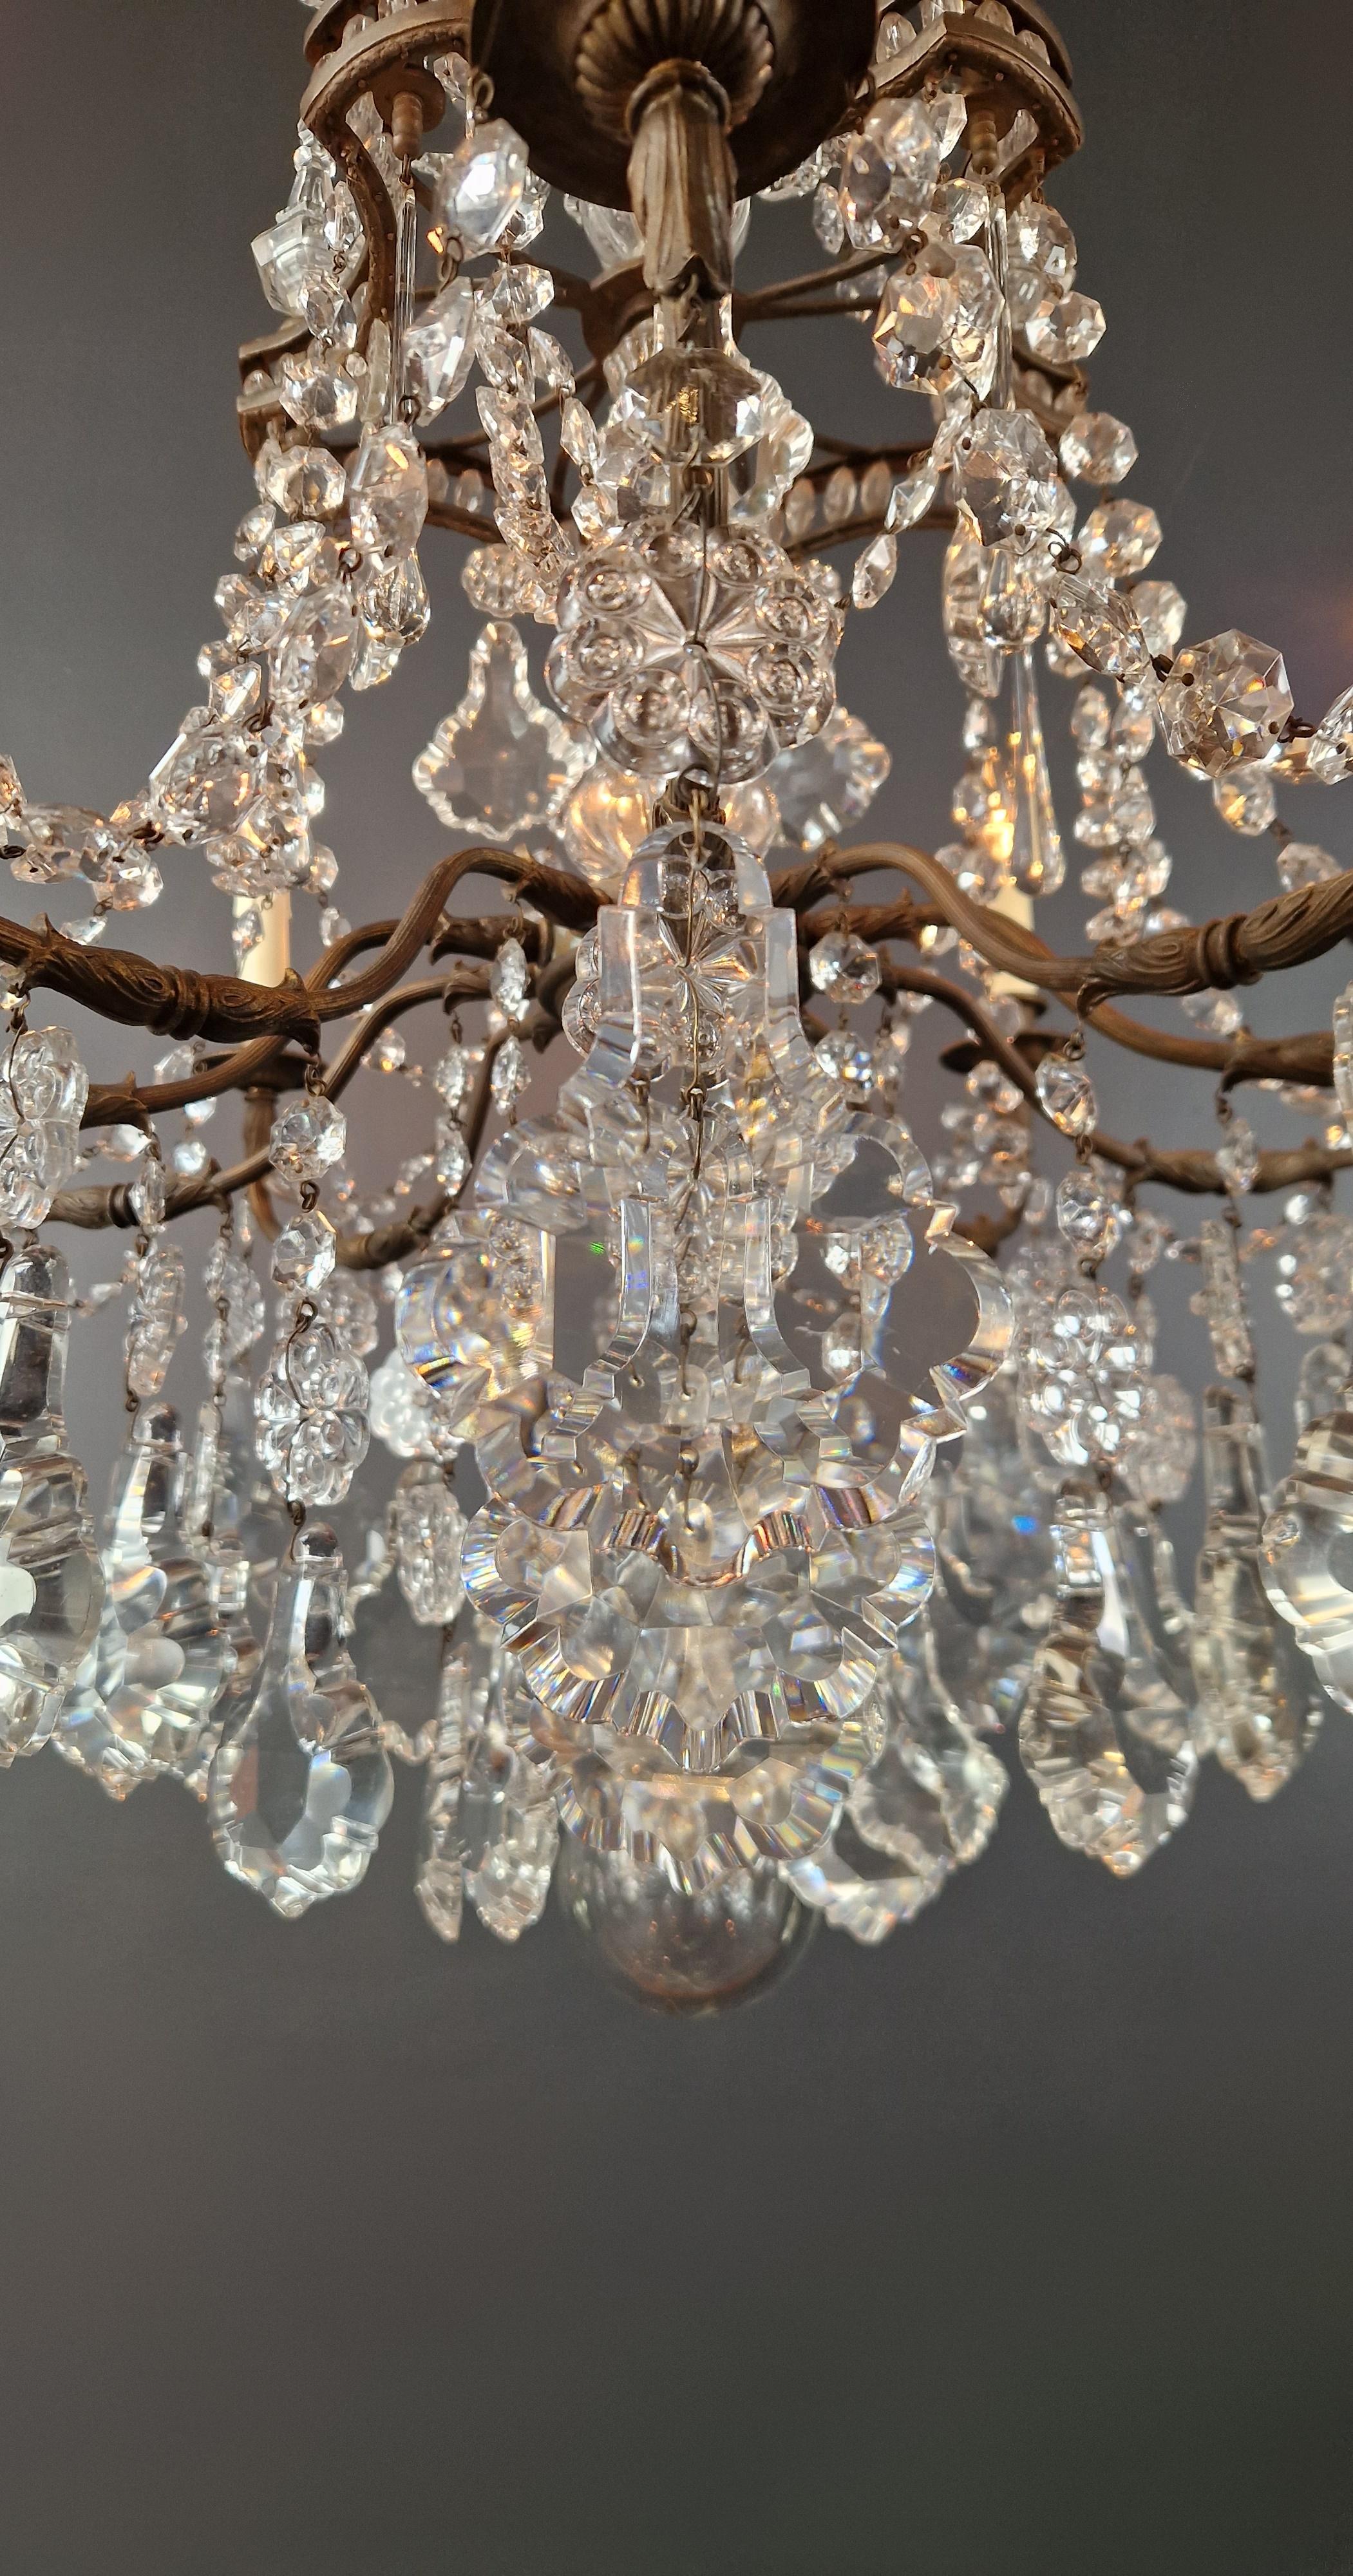 Art Nouveau Crystal Chandelier Brass Large Crystals Traditional Antique Ceiling For Sale 4